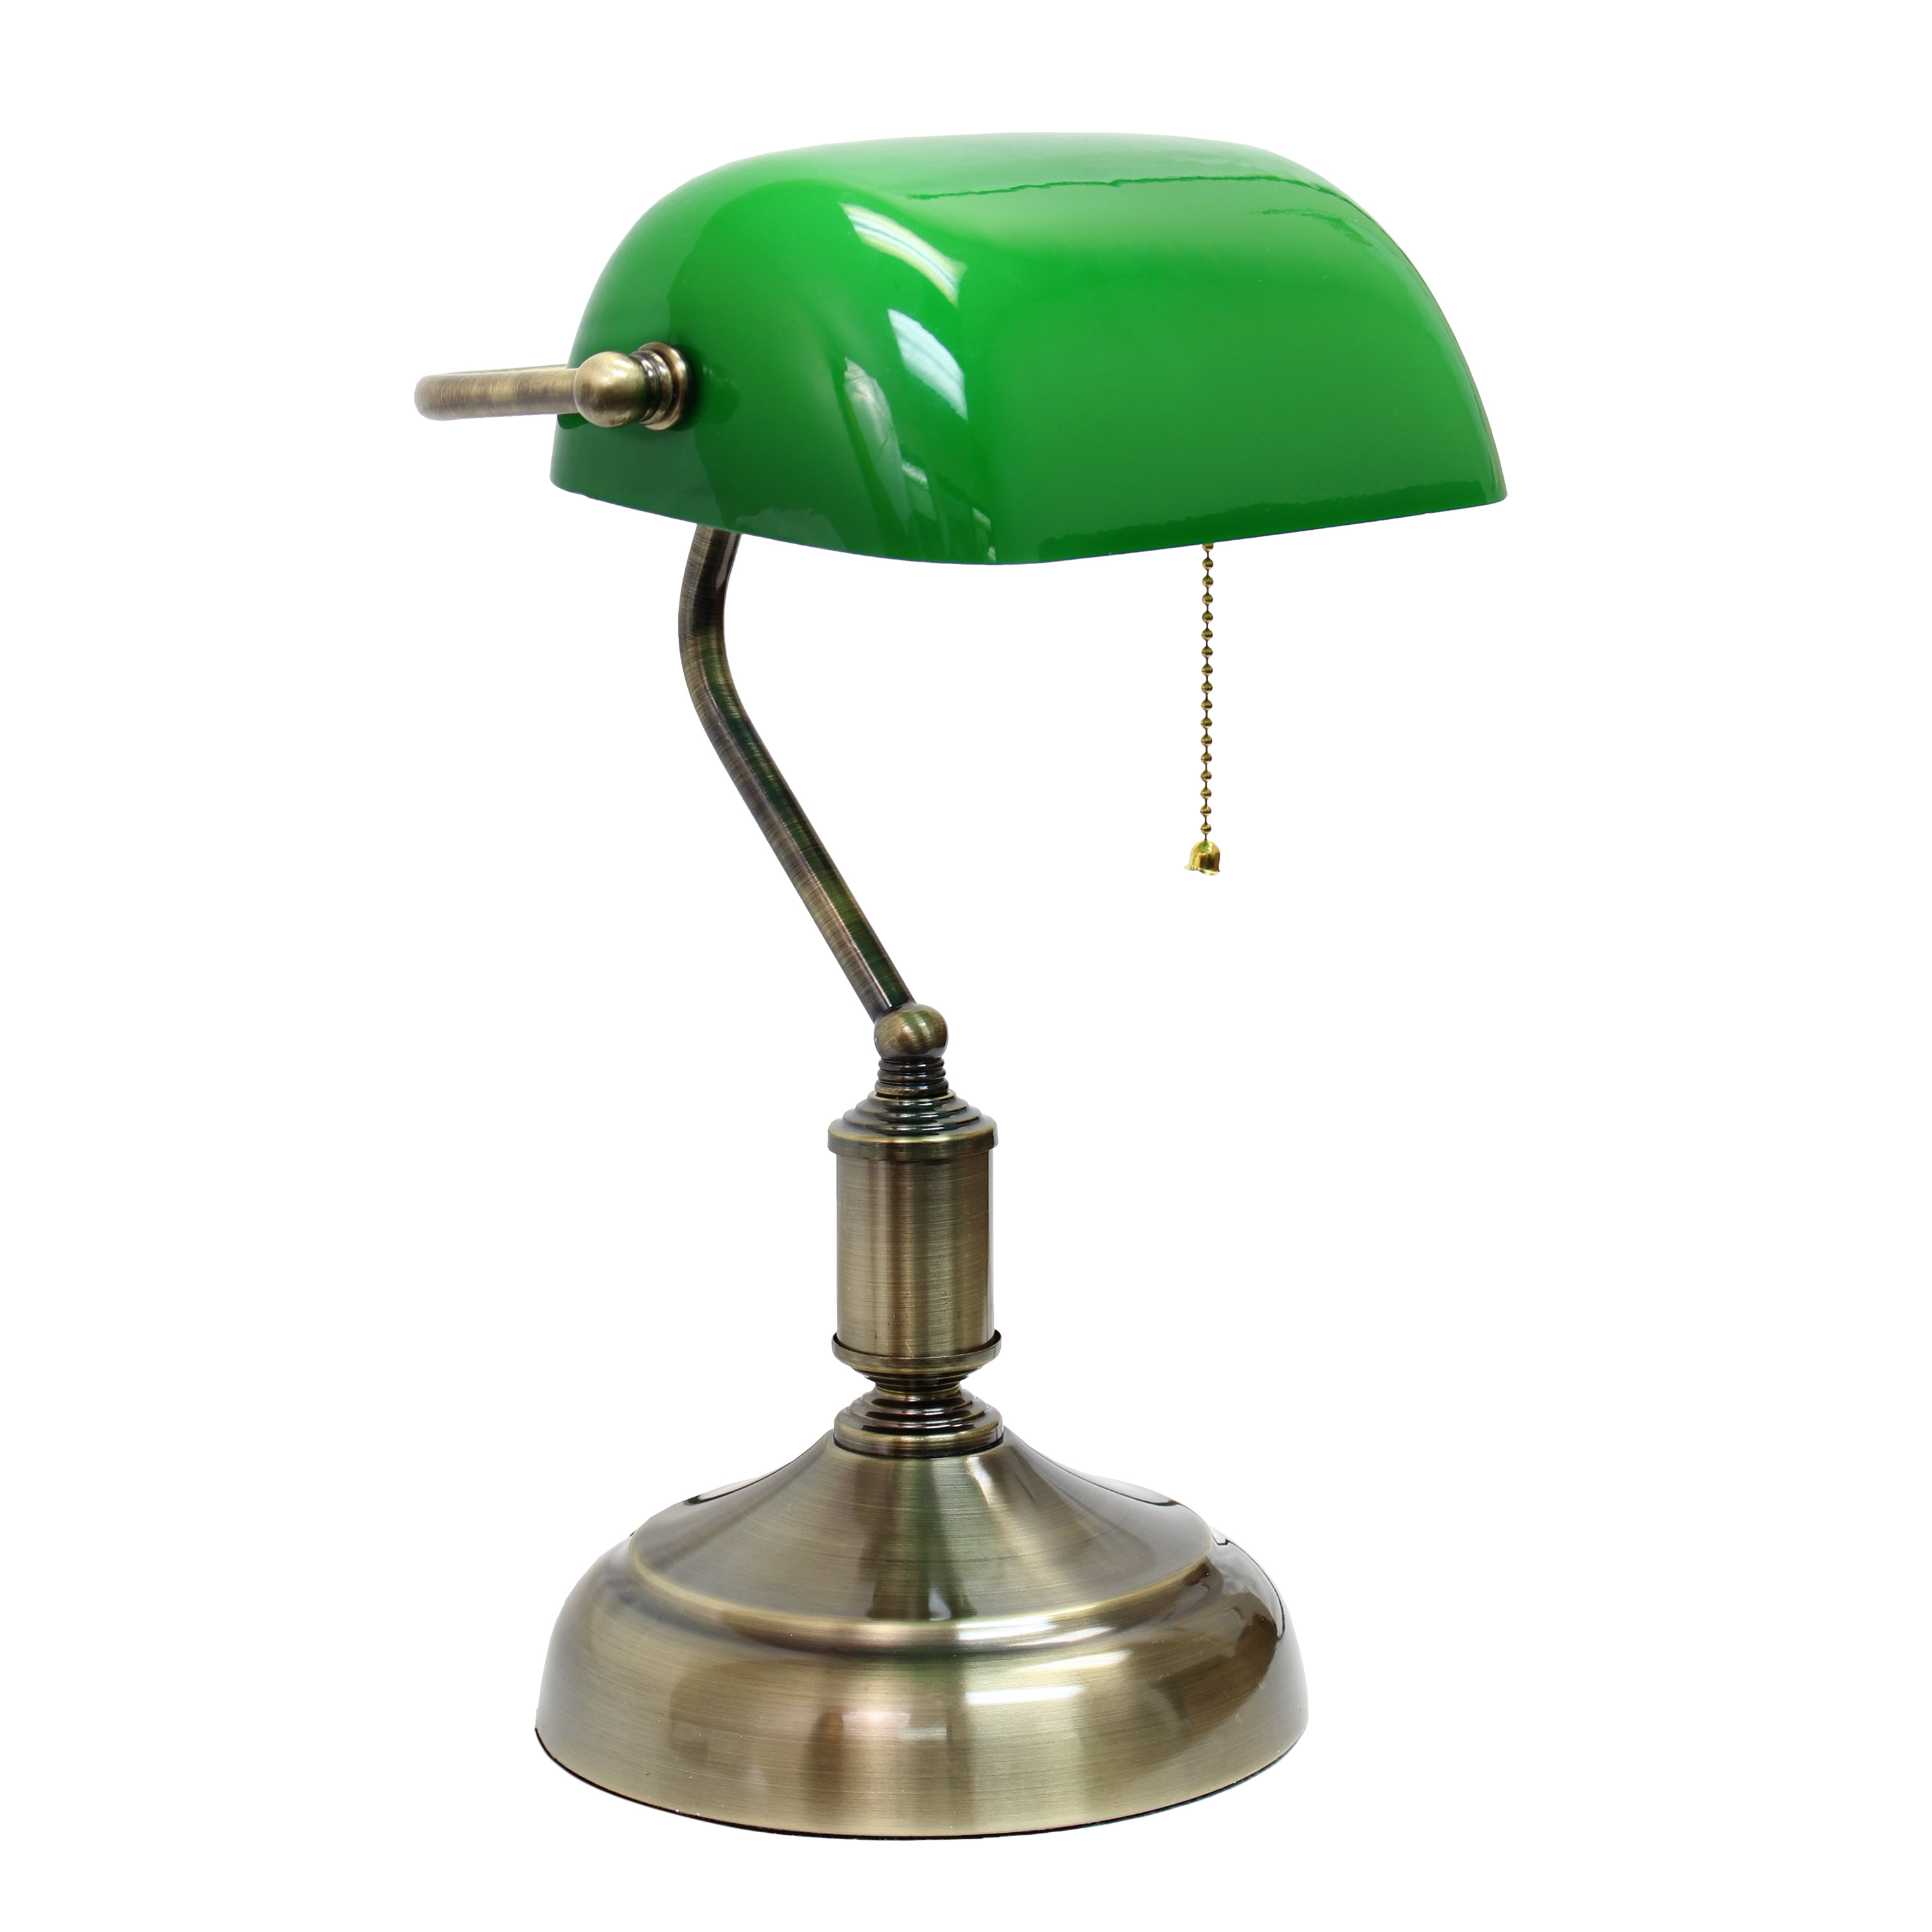 Simple Designs Executive Banker's Desk Lamp with Glass Shade, Green